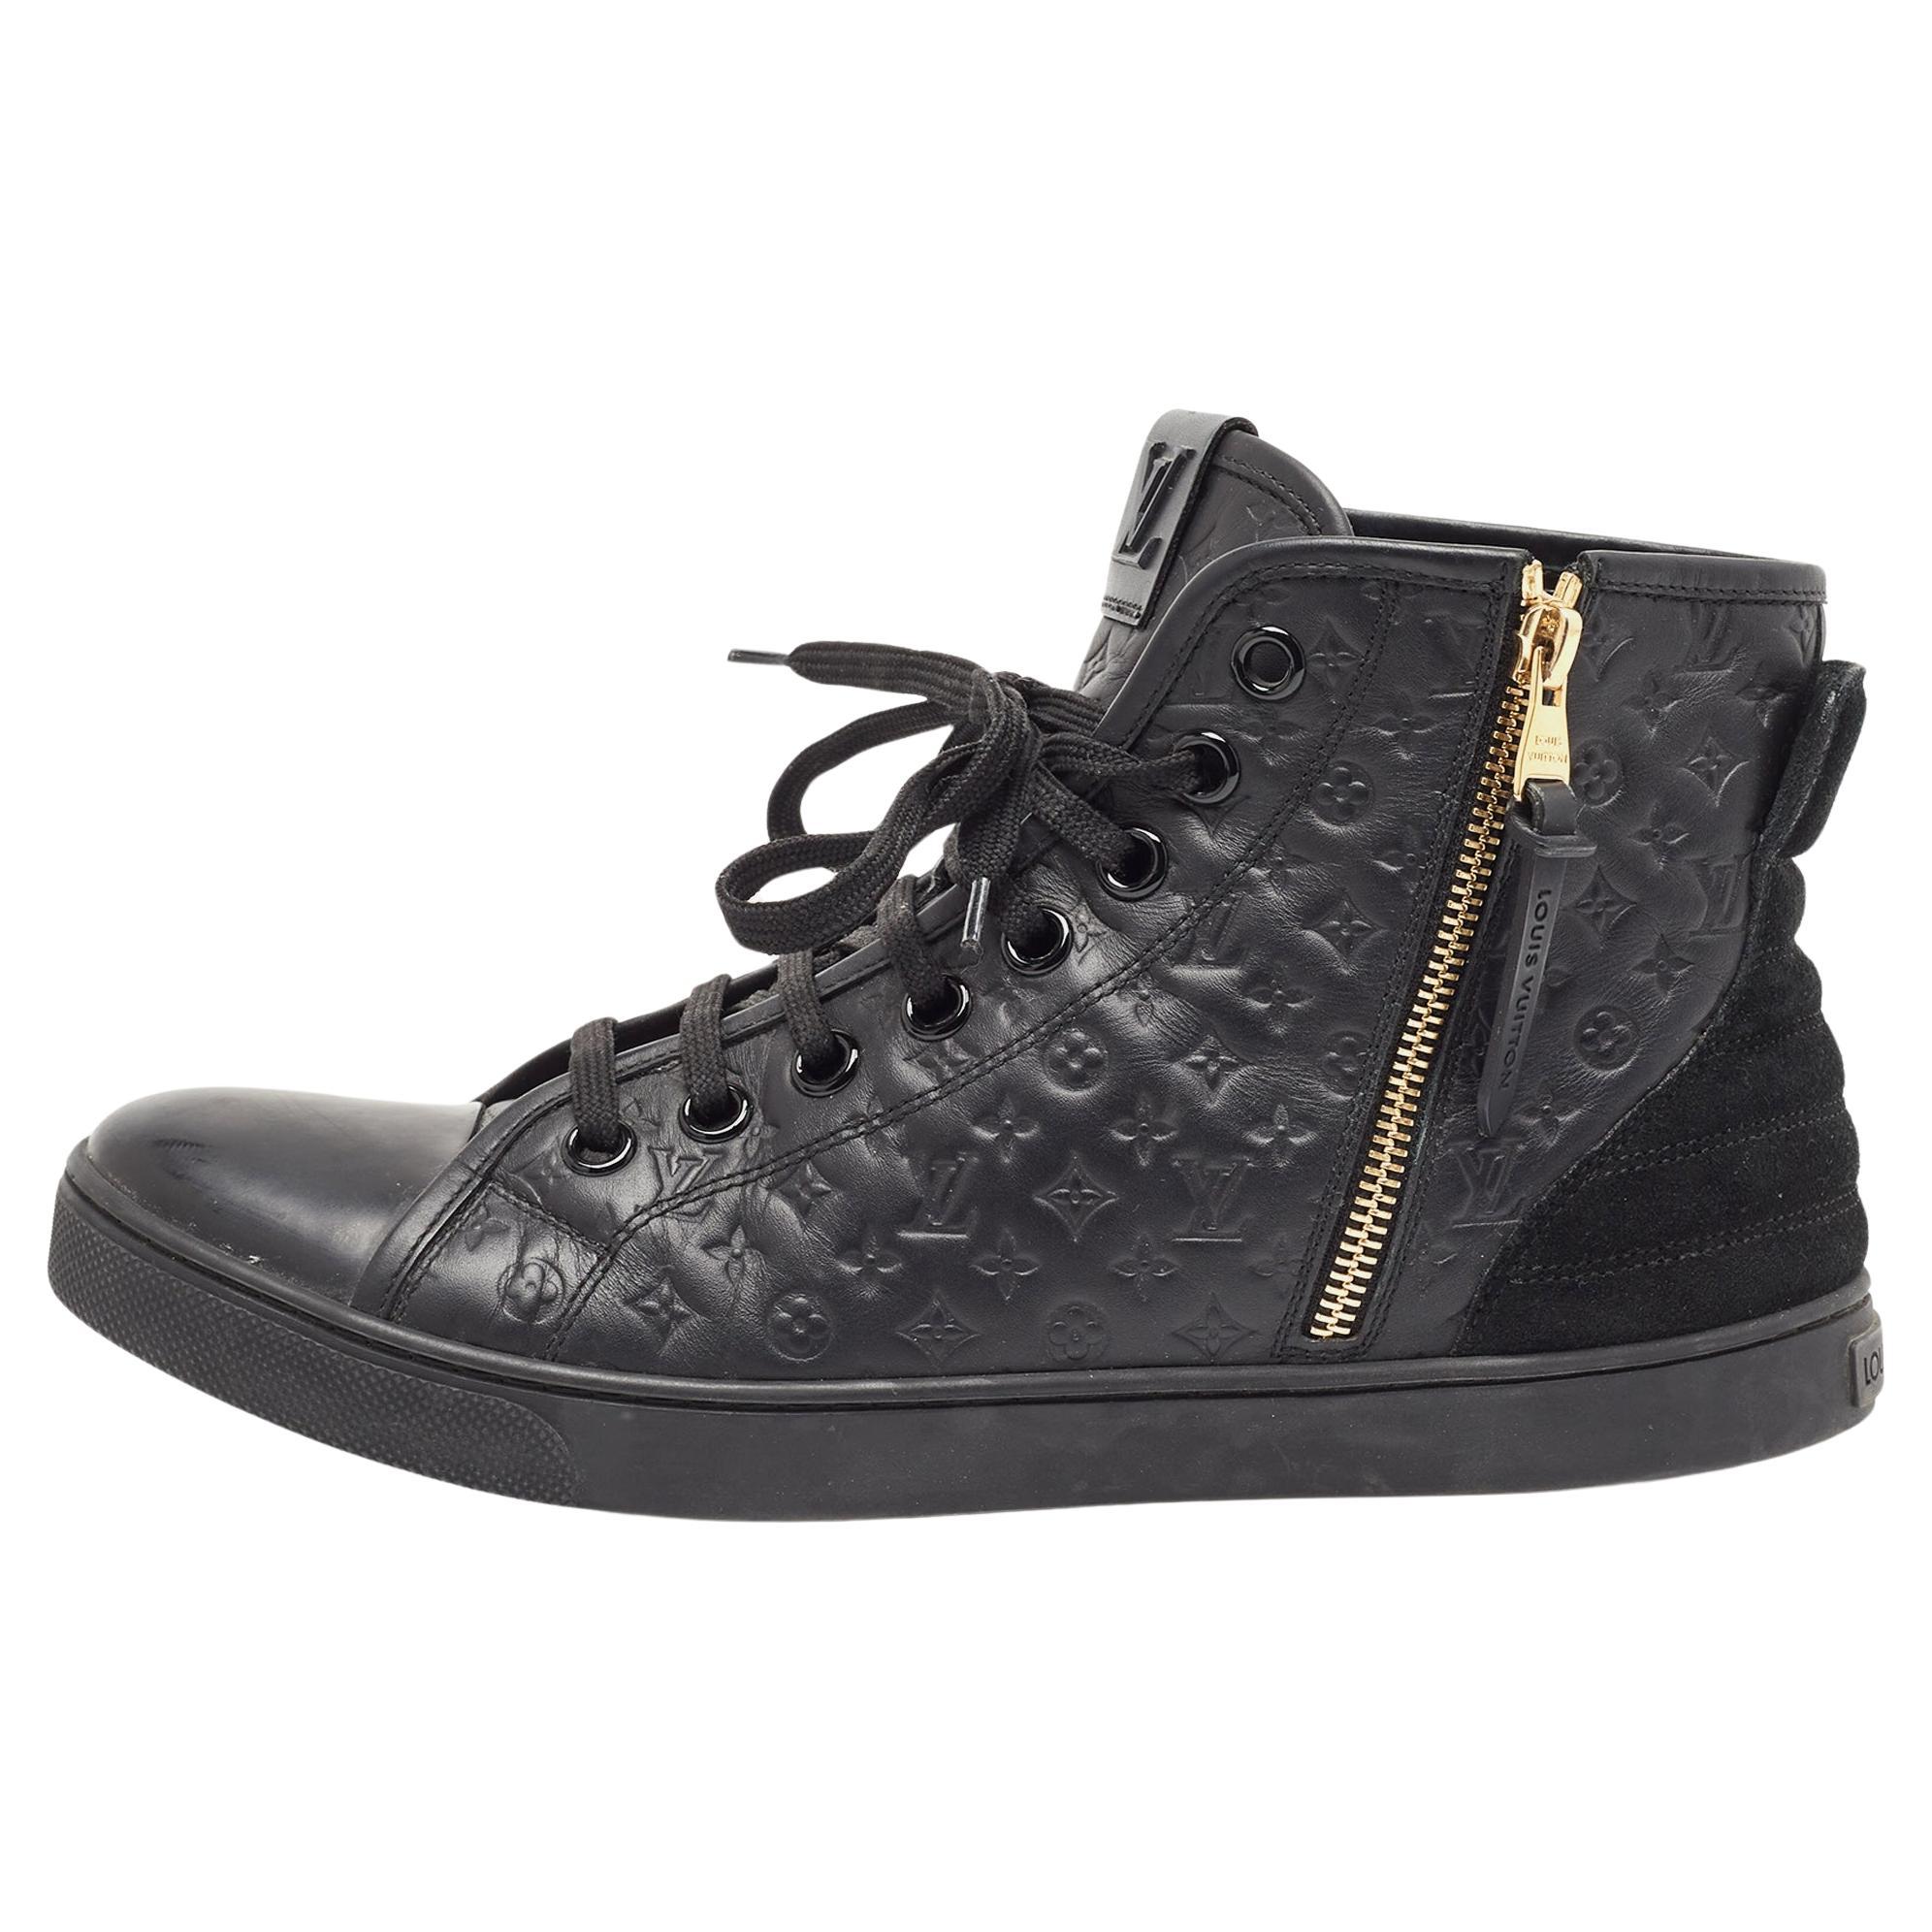 Louis Vuitton Black Leather and Suede Punchy Sneakers Size 40 For Sale